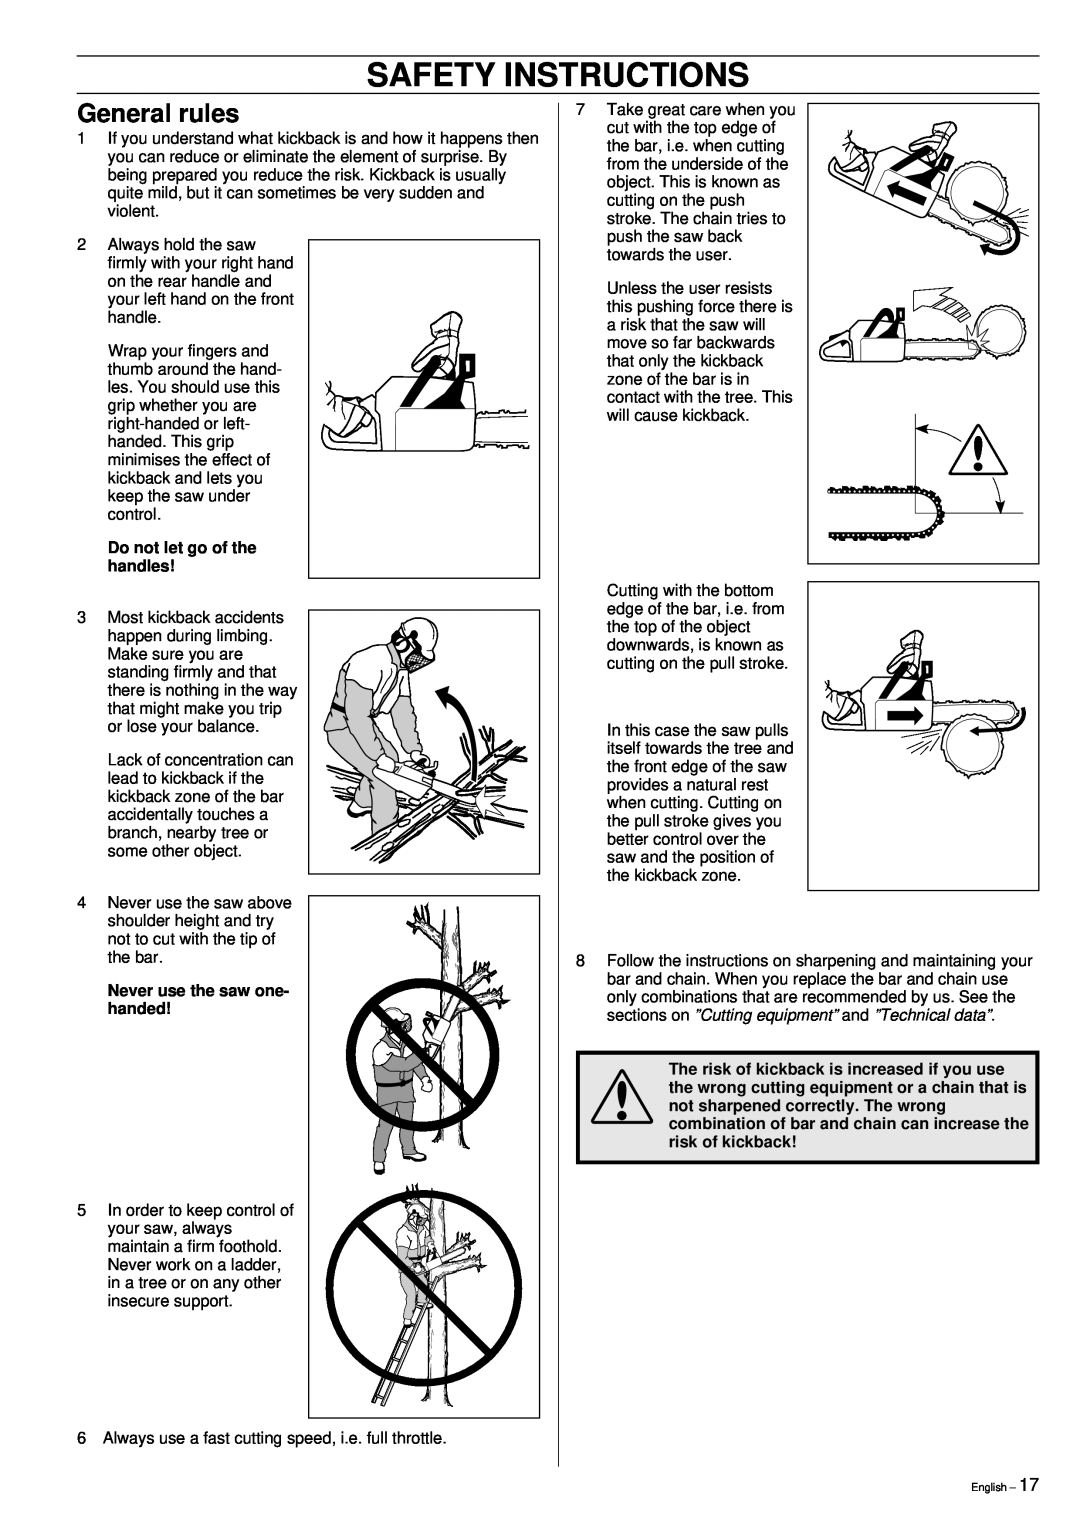 Husqvarna 355 manual General rules, Safety Instructions, Do not let go of the handles, Never use the saw one- handed 